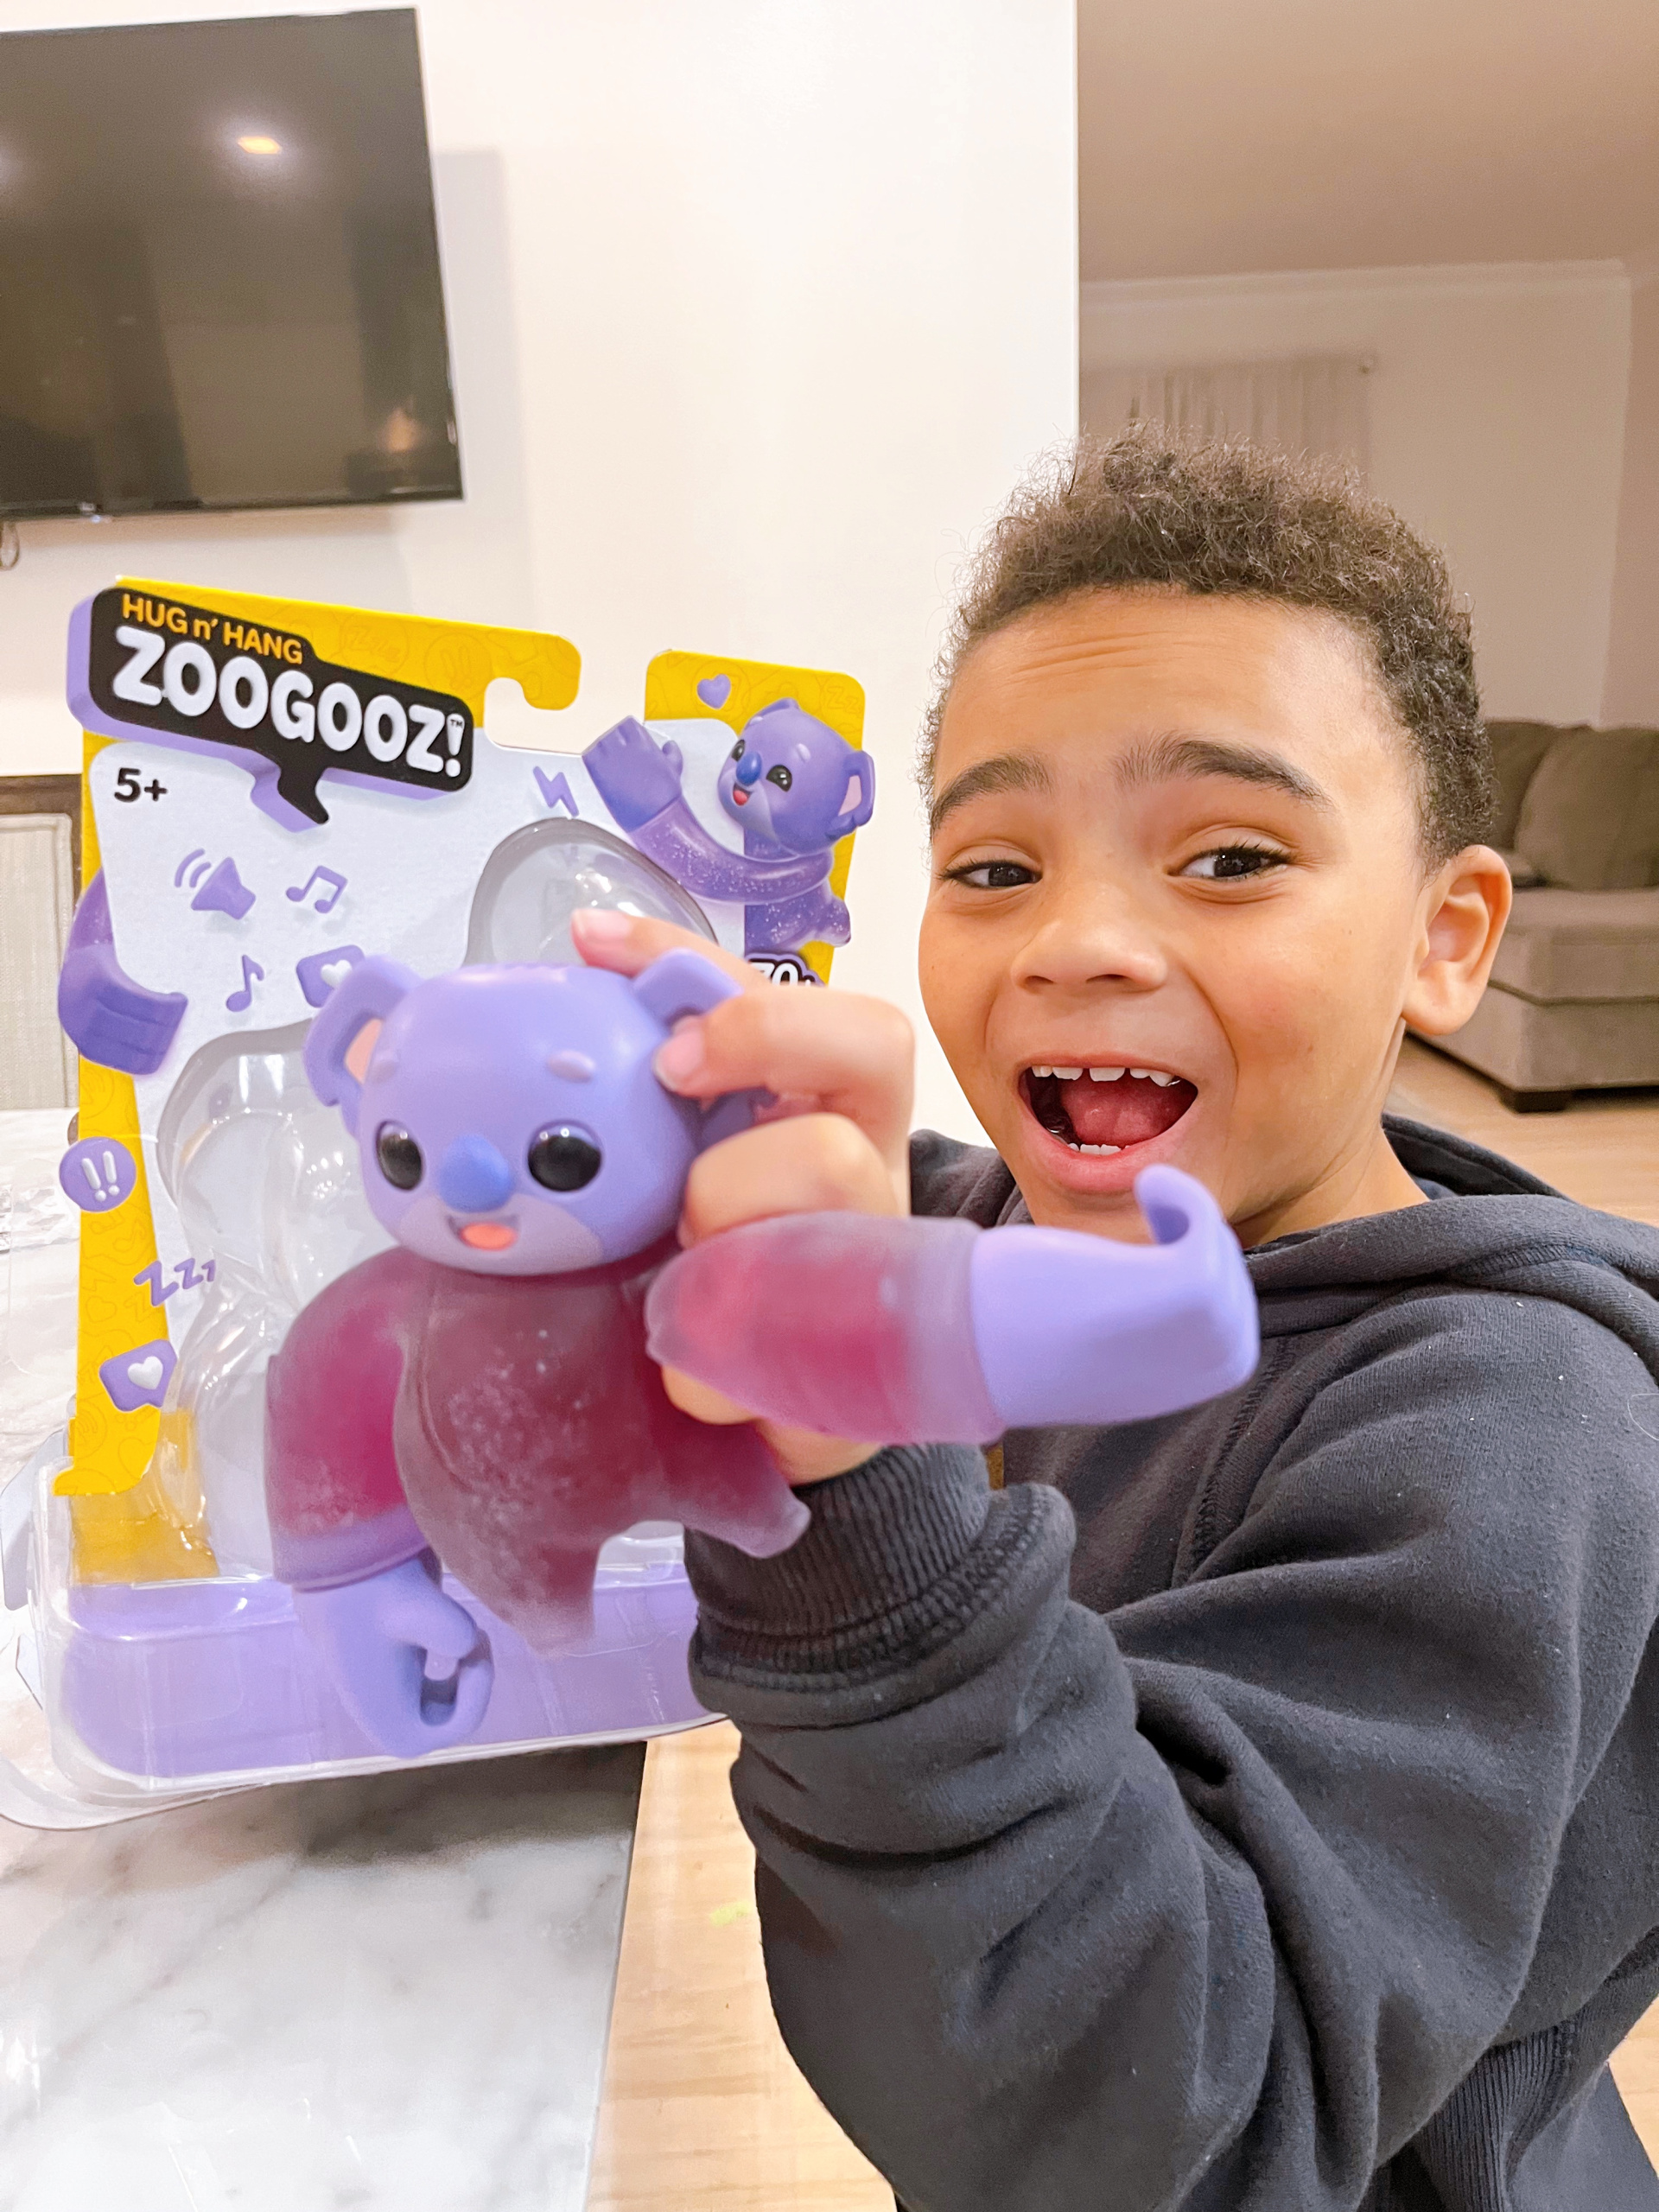 Moose Toys Reveals Magical Must-Have Holiday Toy of 2021: NEW